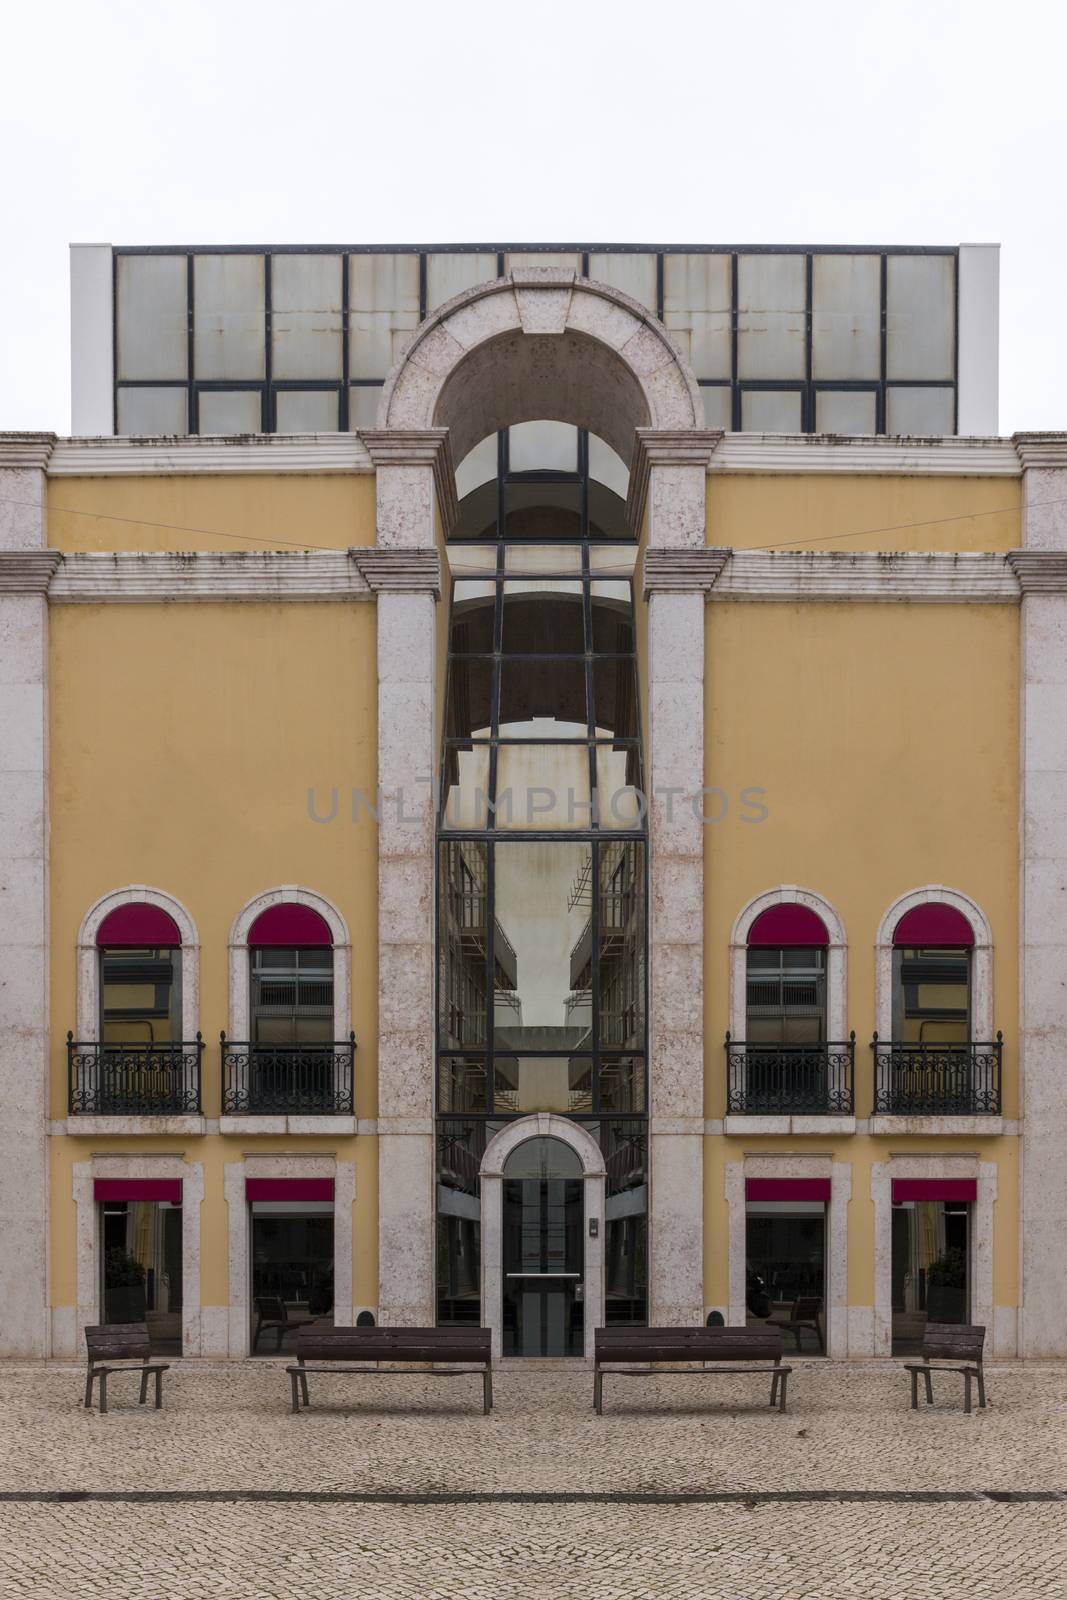 View of a tall and modern historical building in Faro city.